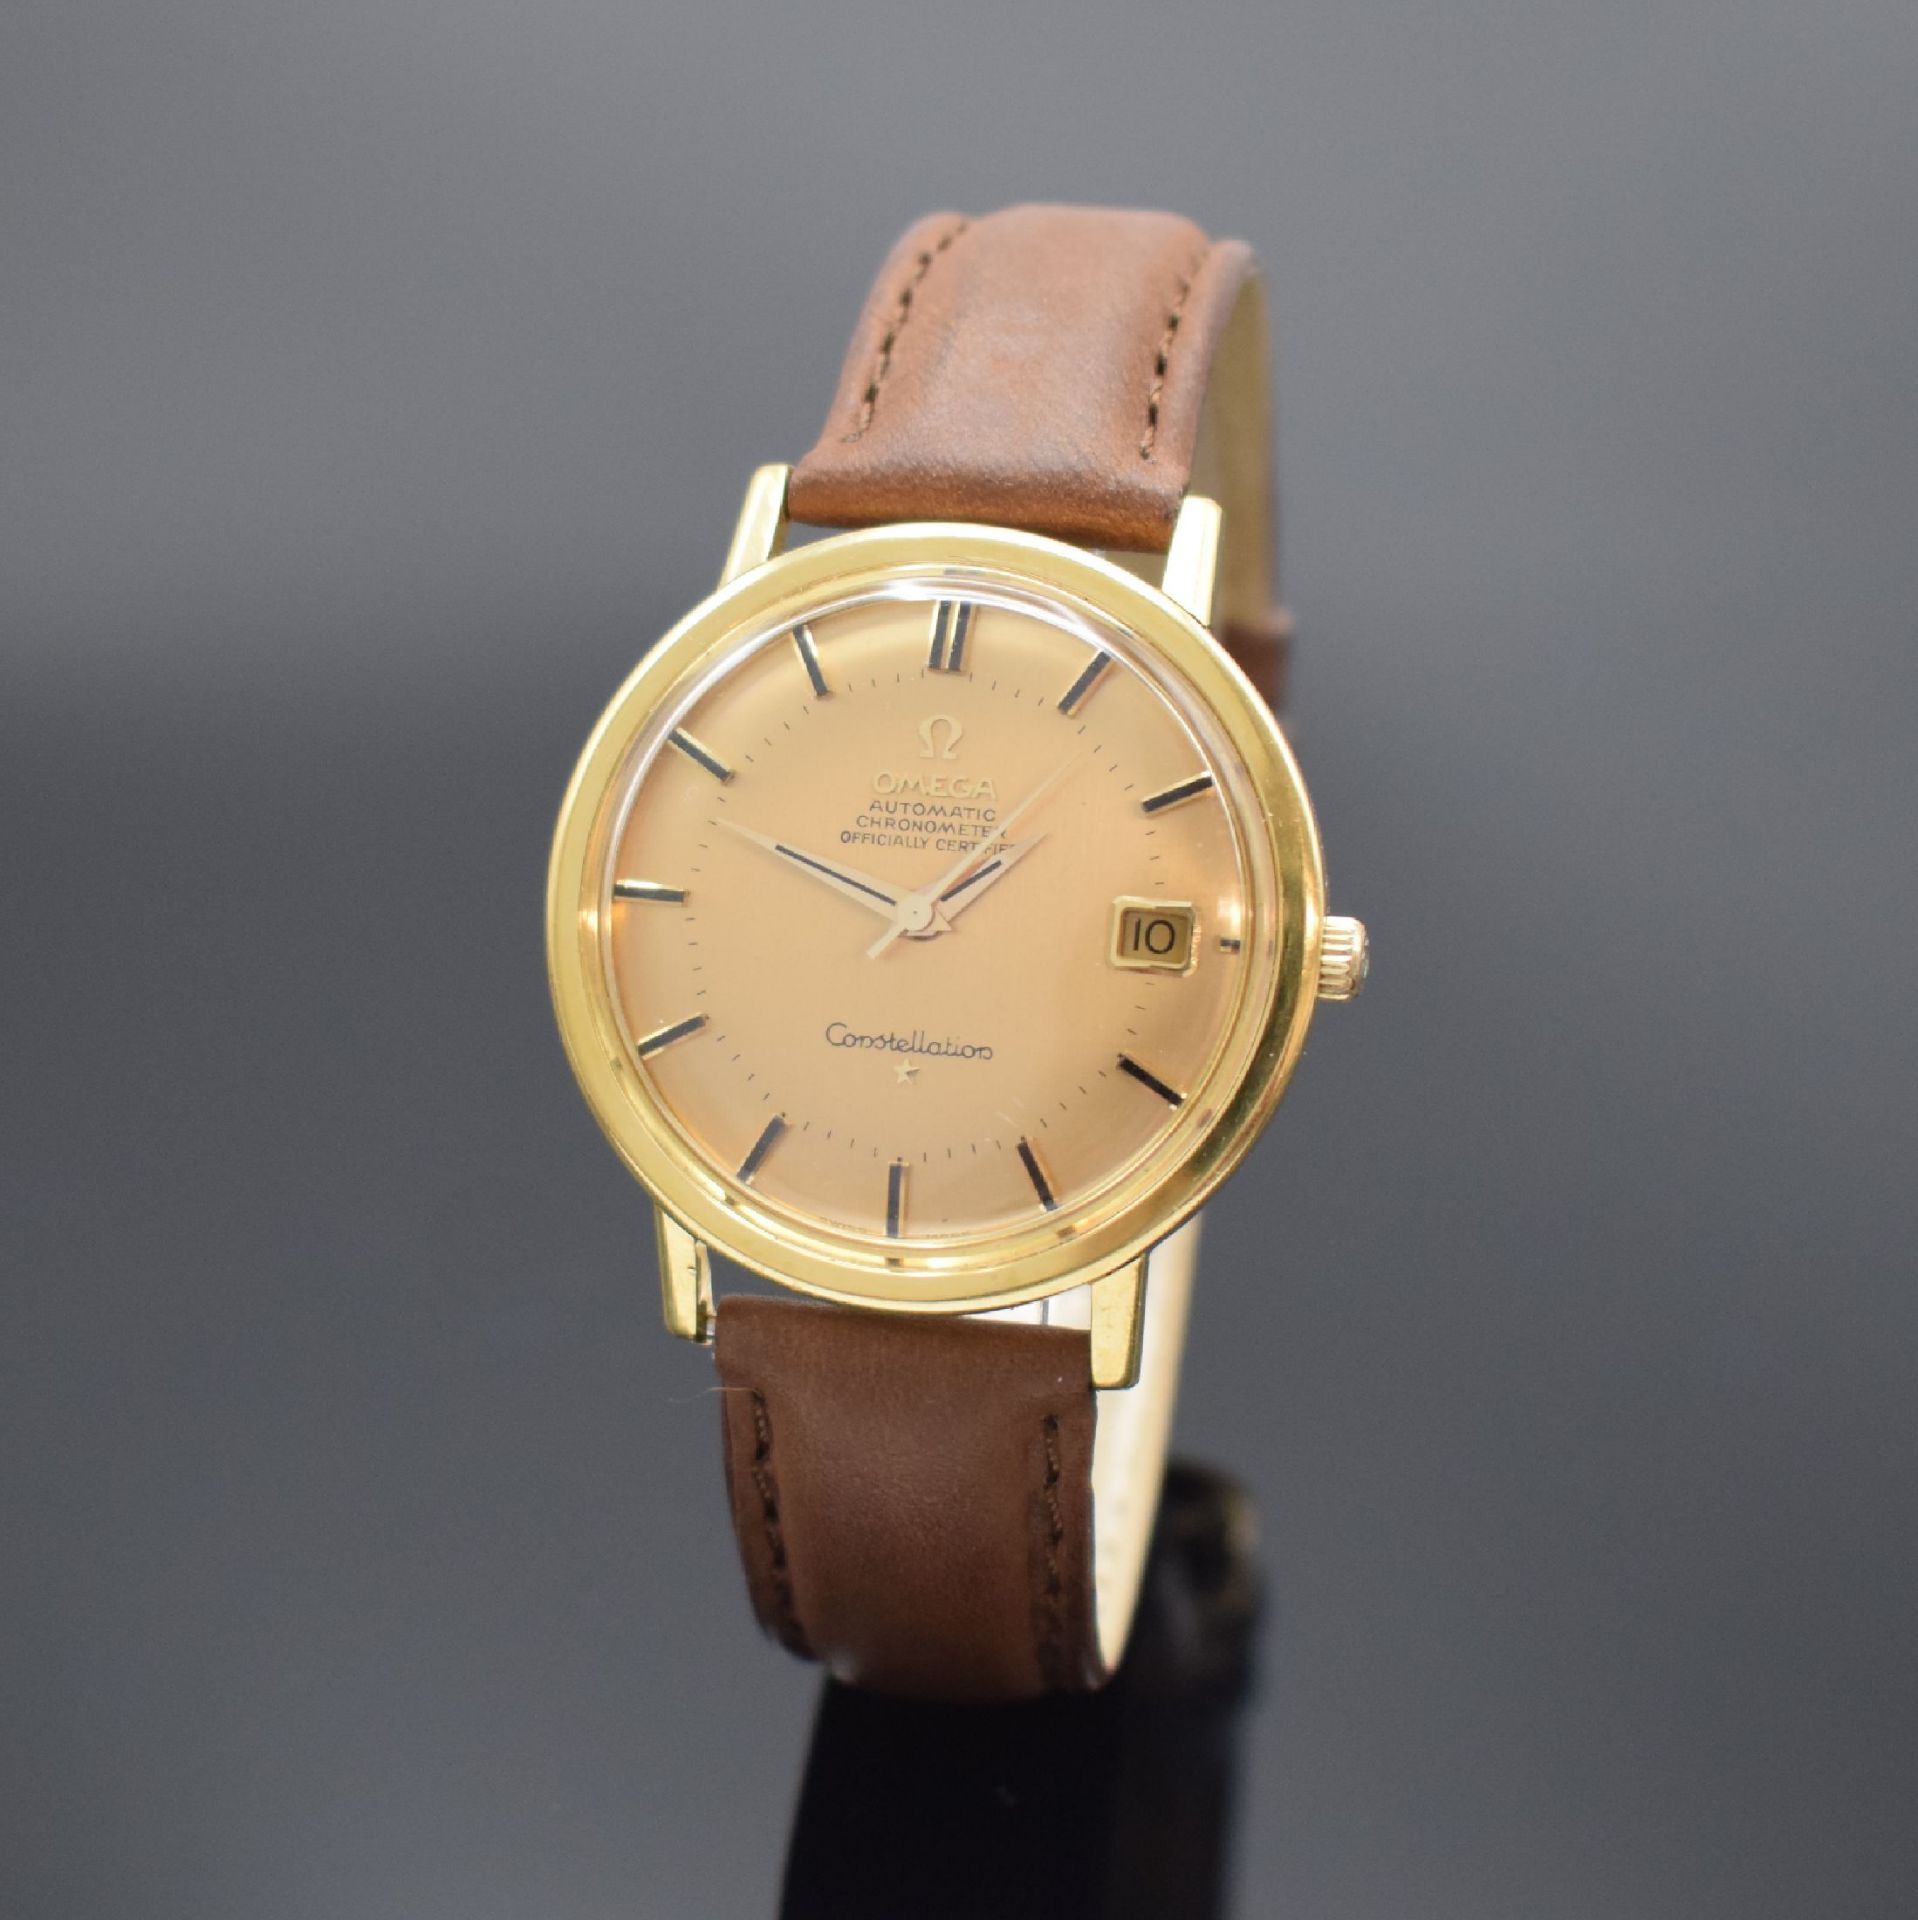 OMEGA Constellation Armbandchronometer in GG 750/000 mit